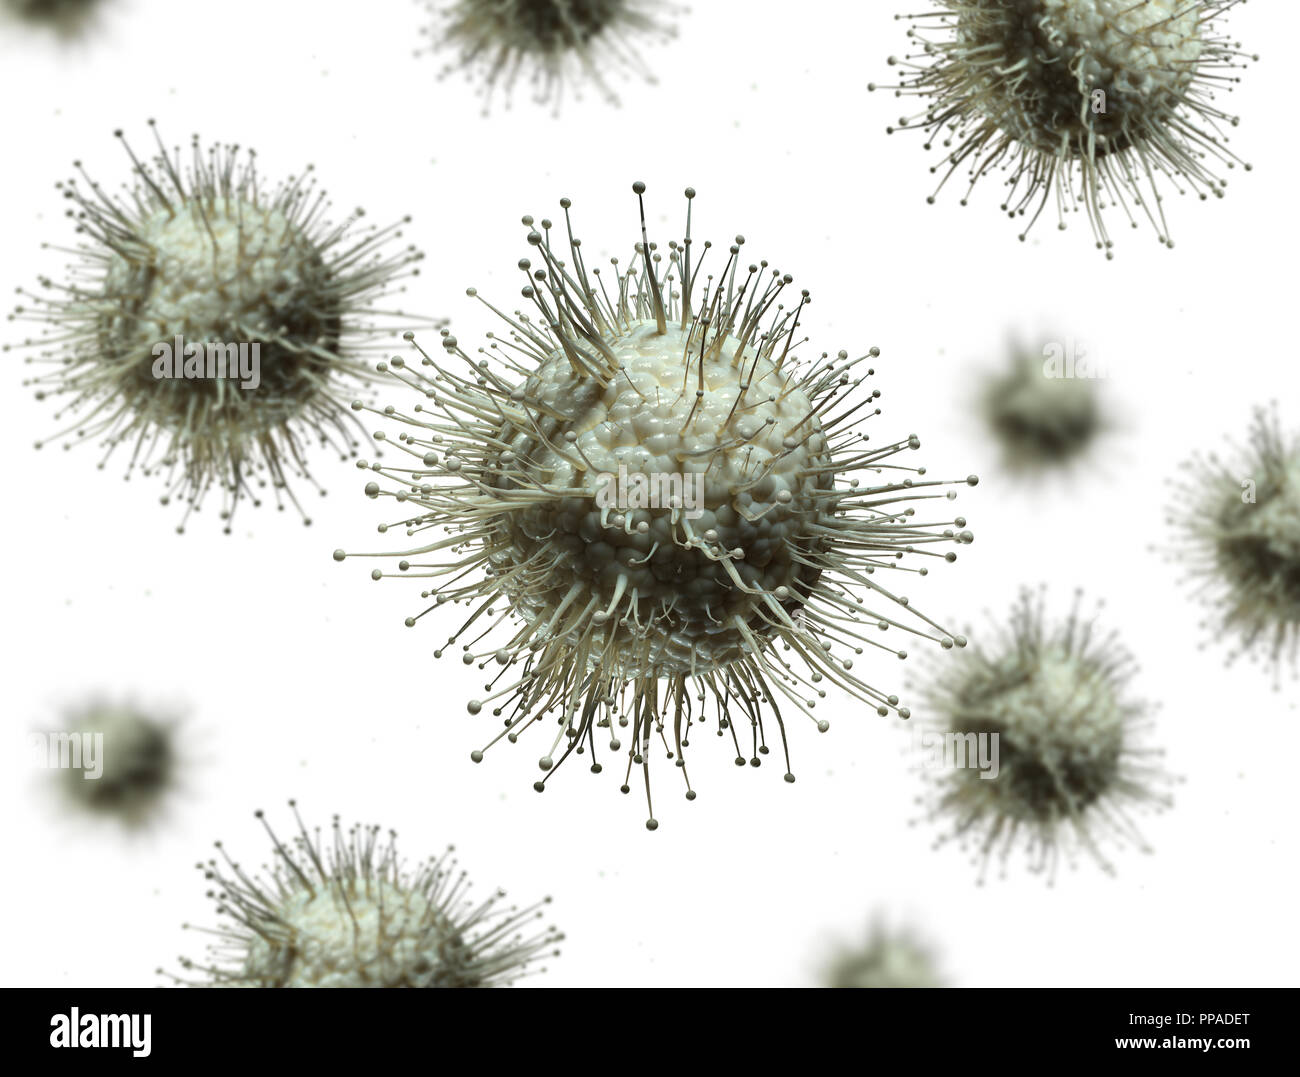 Sick cells 3d illustration with depth of field isolated on white background Stock Photo